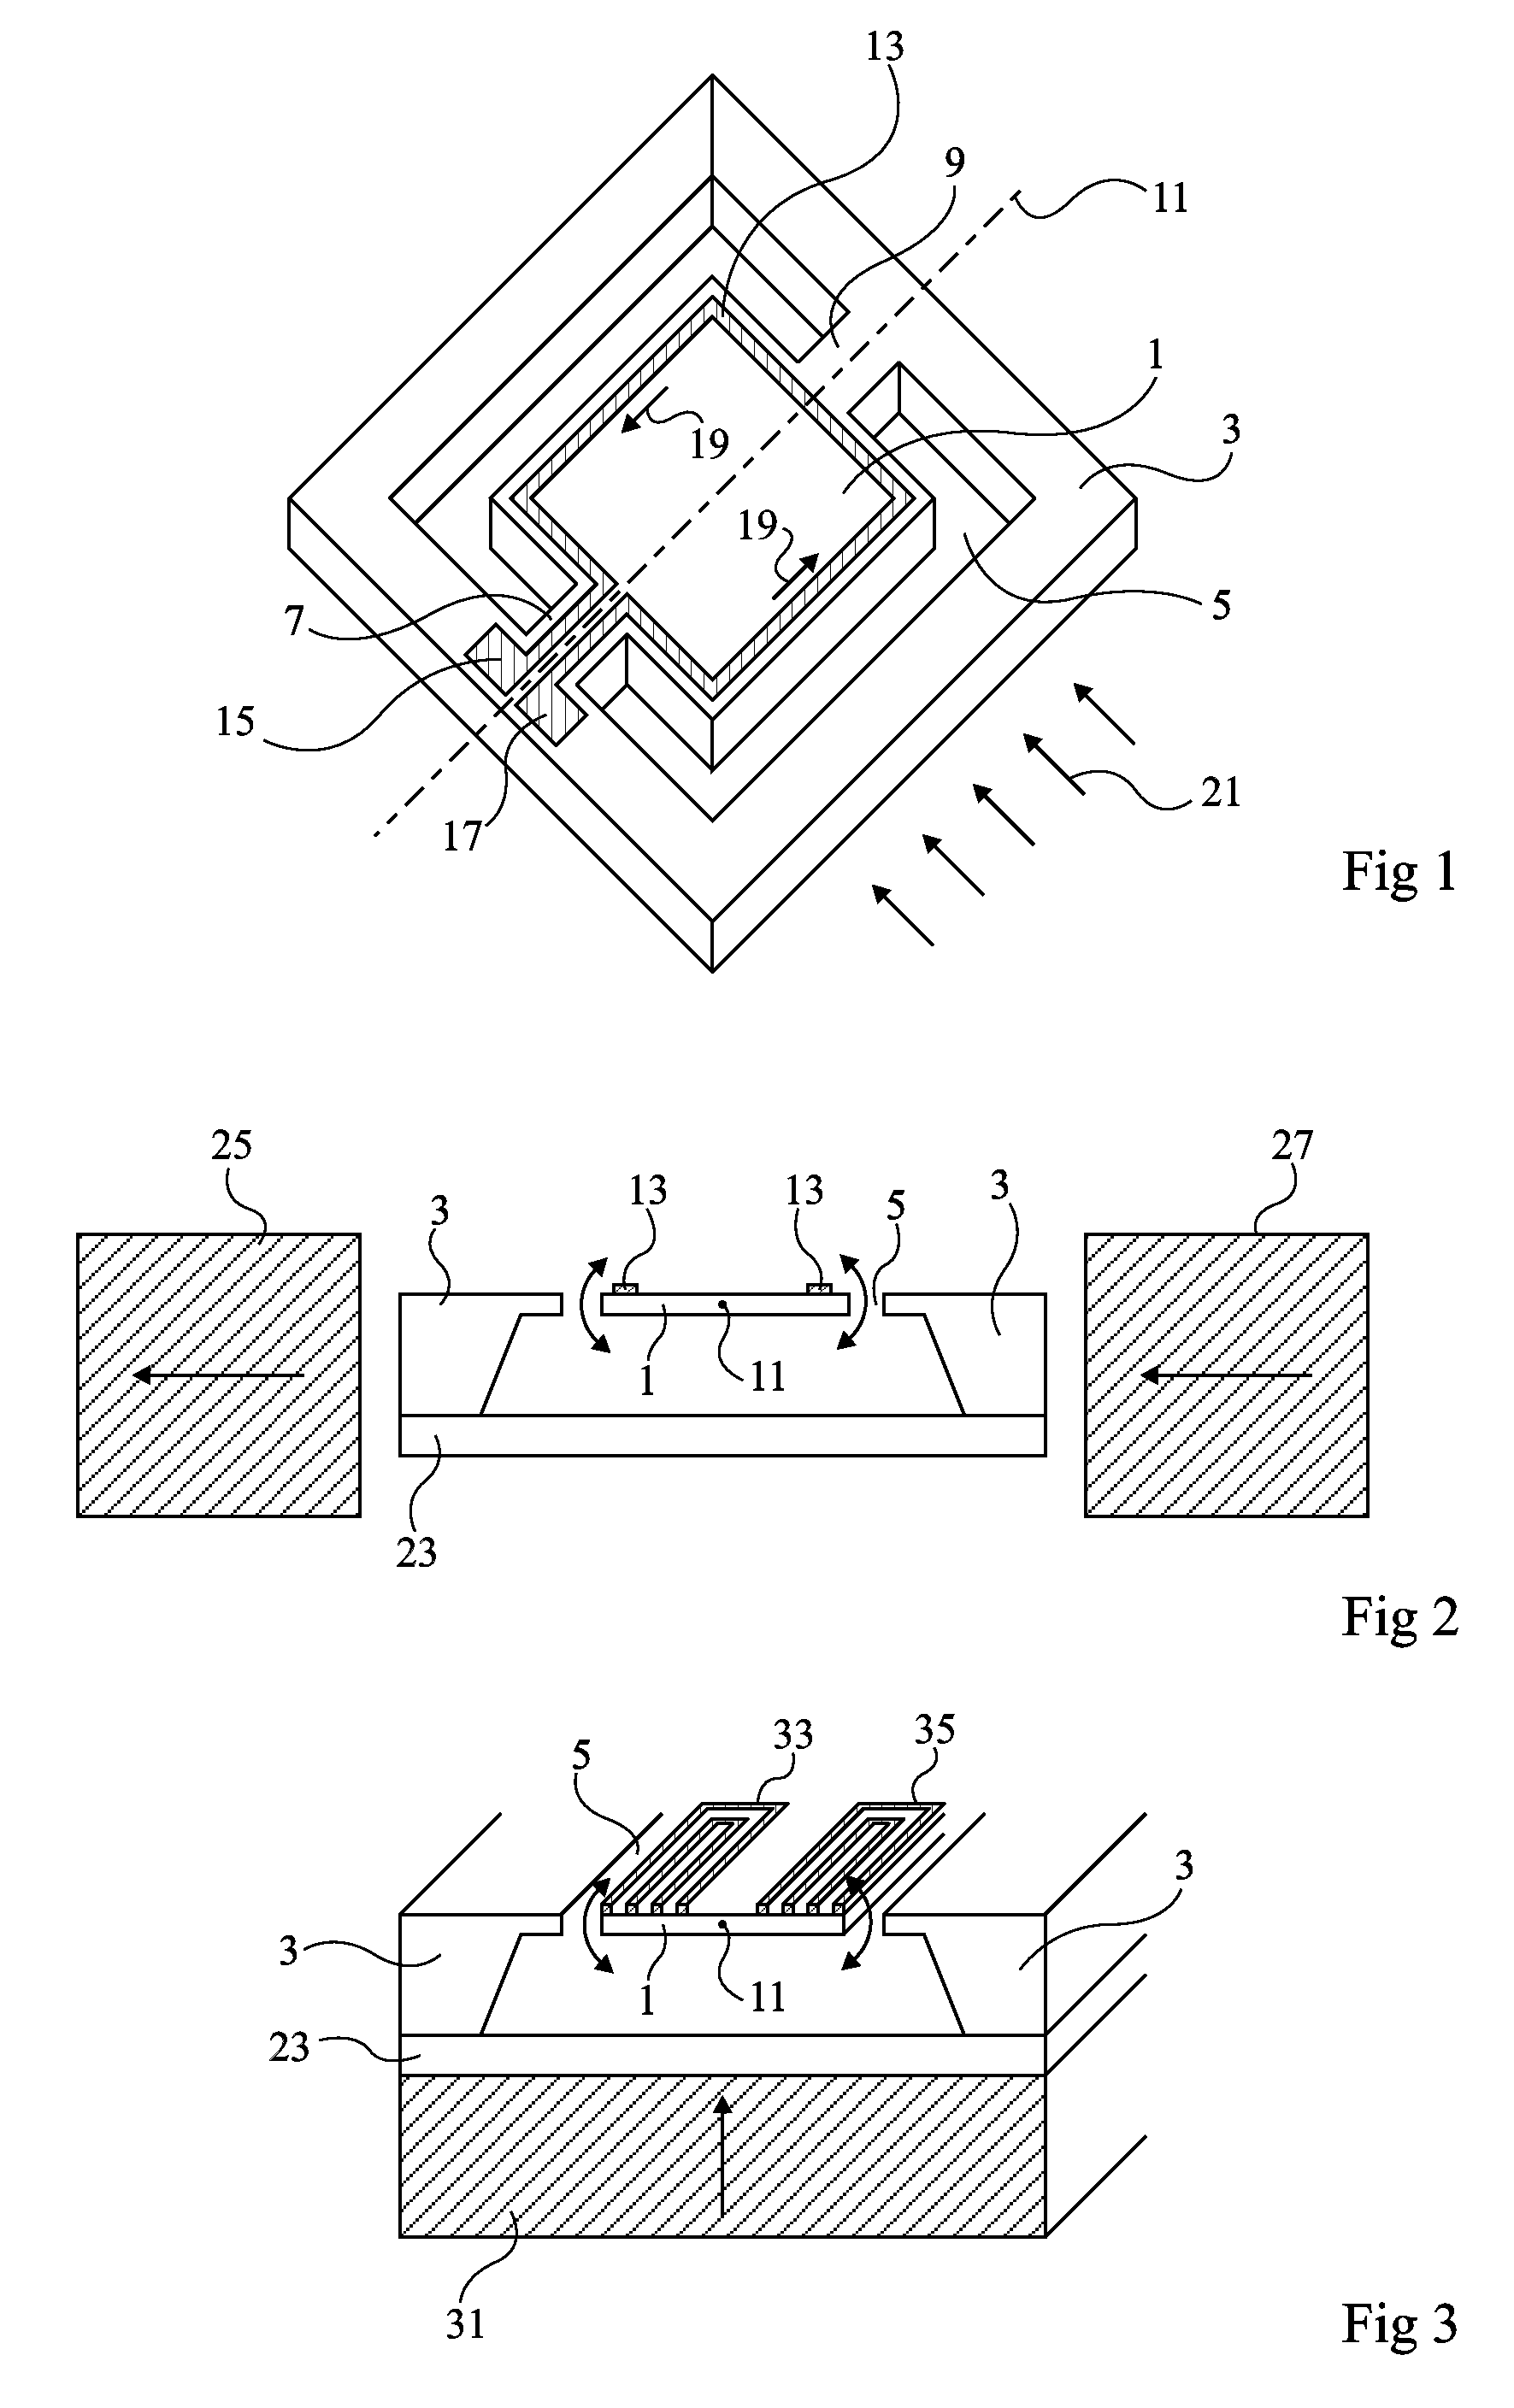 Electromagnetically actuated microshutter